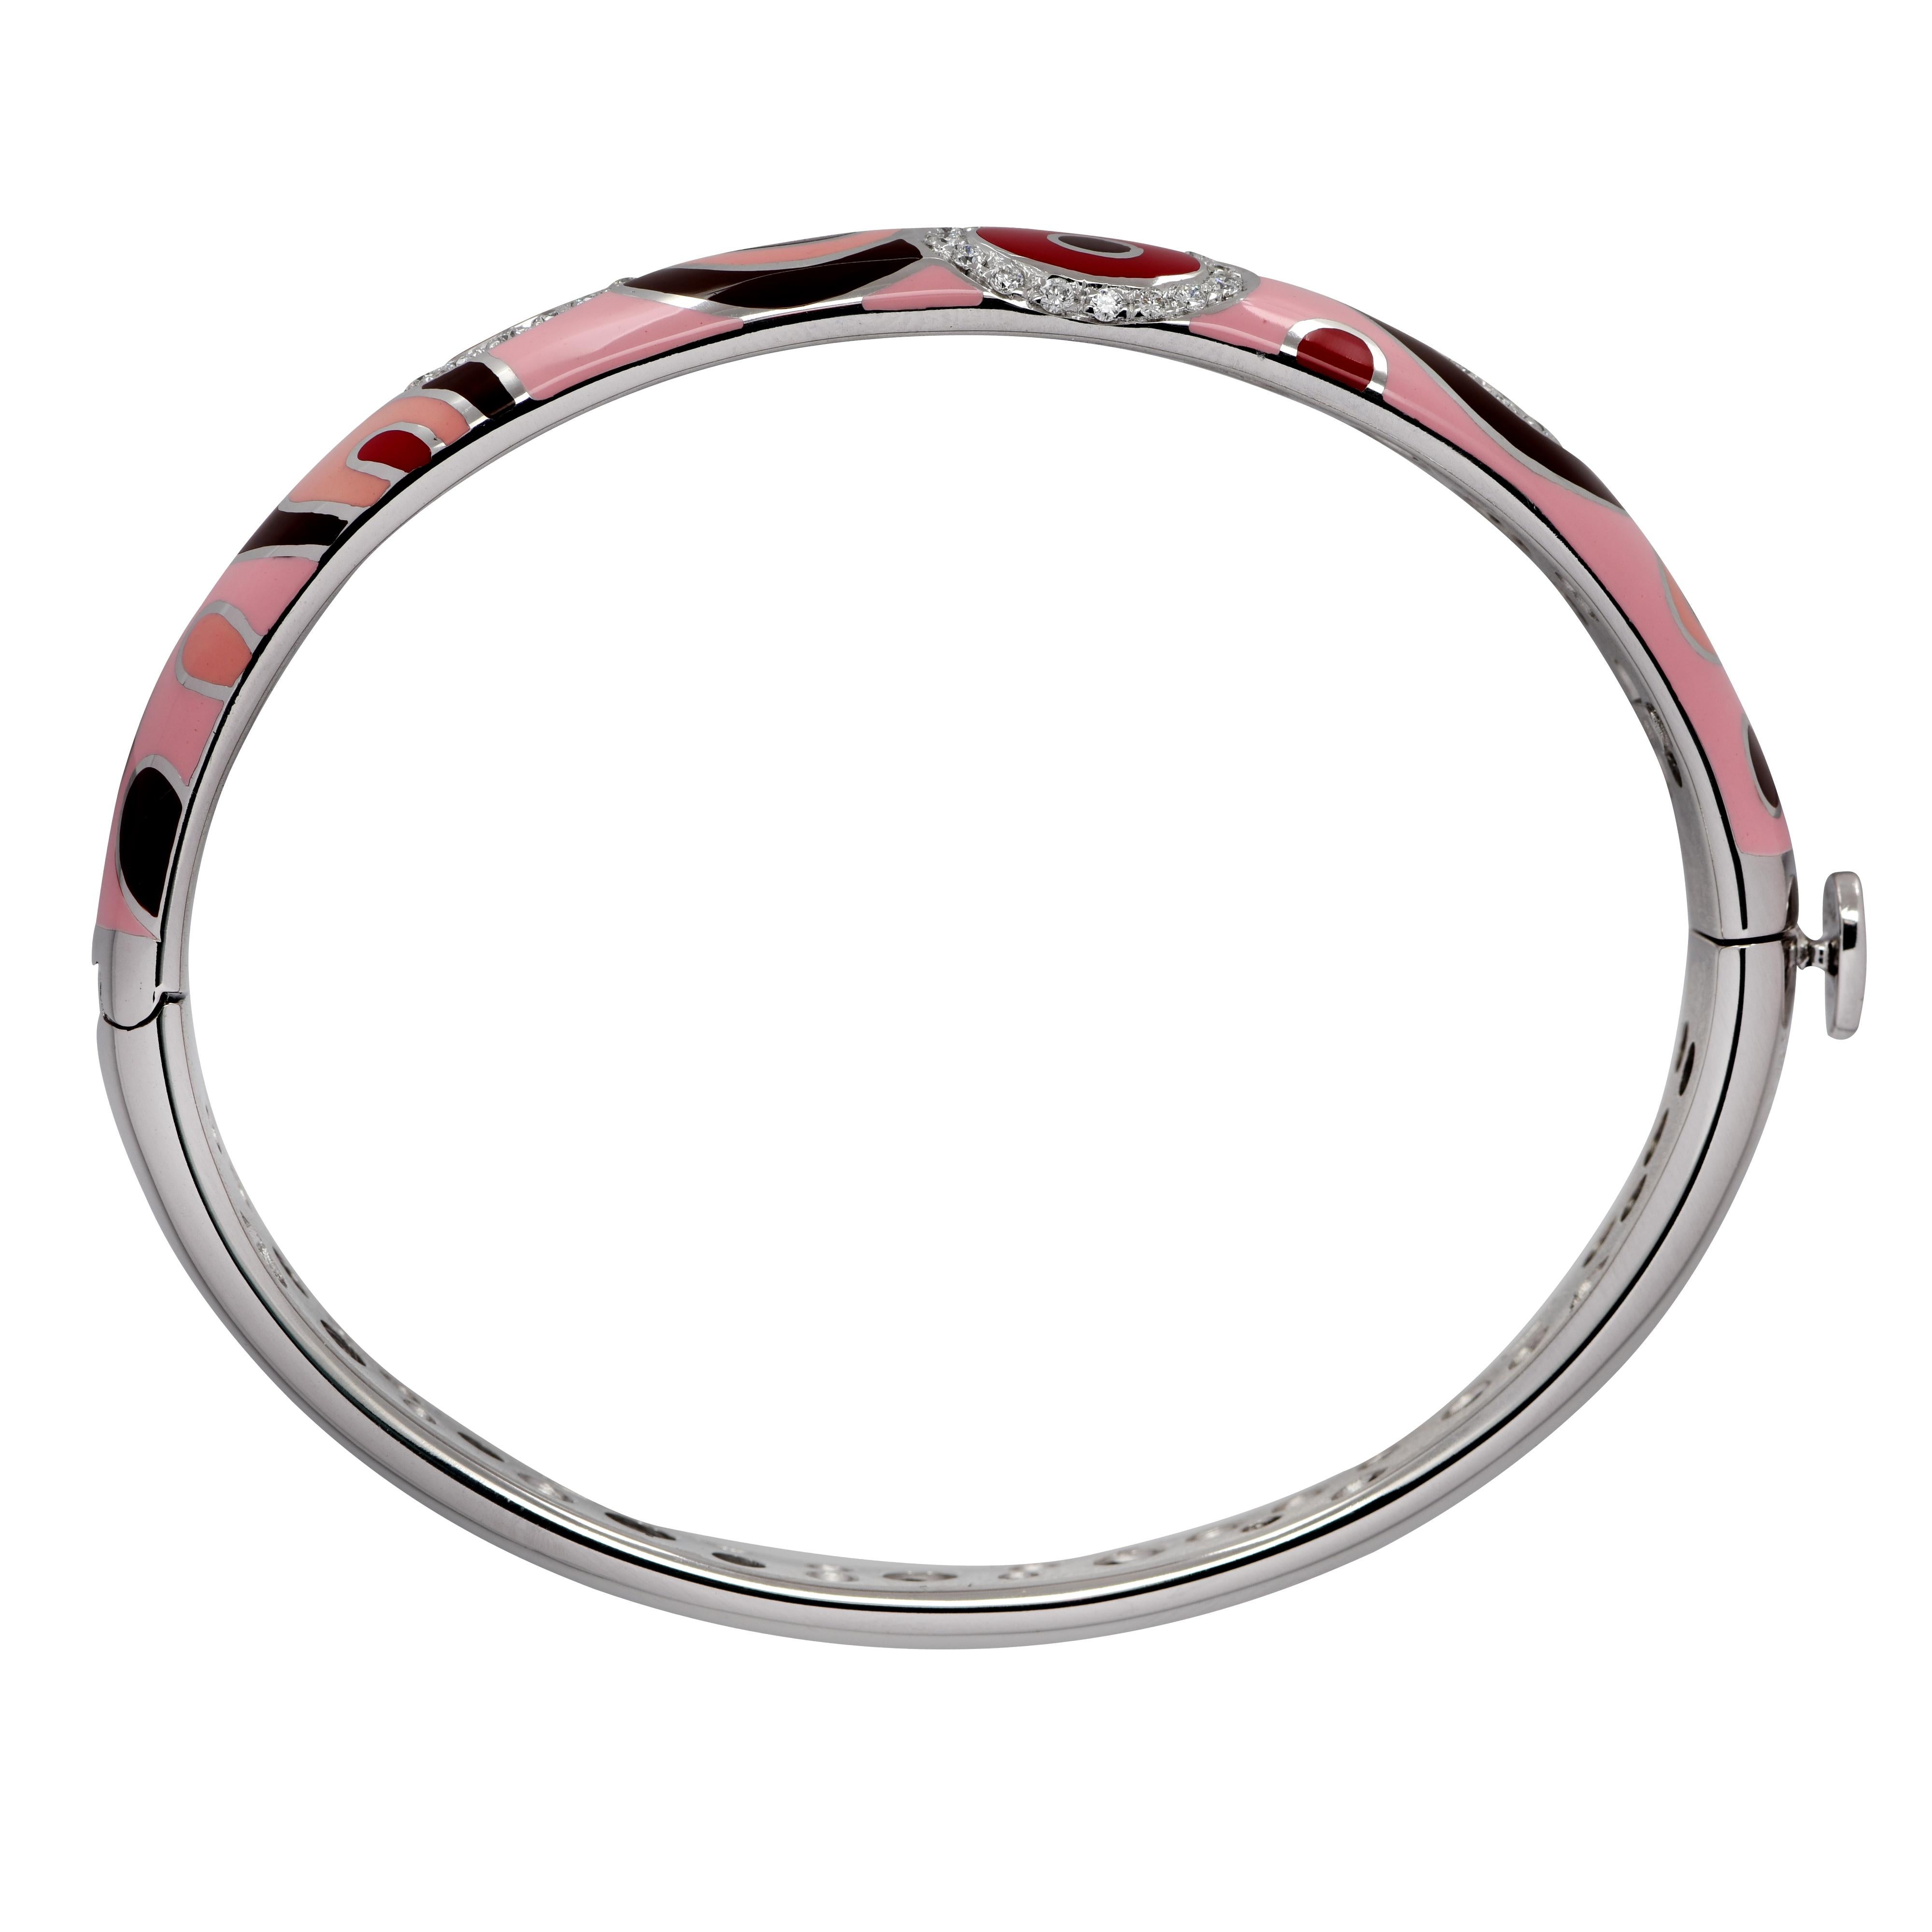 Stunning Roberto Coin bracelet crafted in 18 karat white gold, pink, red and brown enamel and diamonds. This exquisite bracelet features enamel and white gold swags and swirls, and 36 round brilliant cut diamonds weighing approximately .50 carats